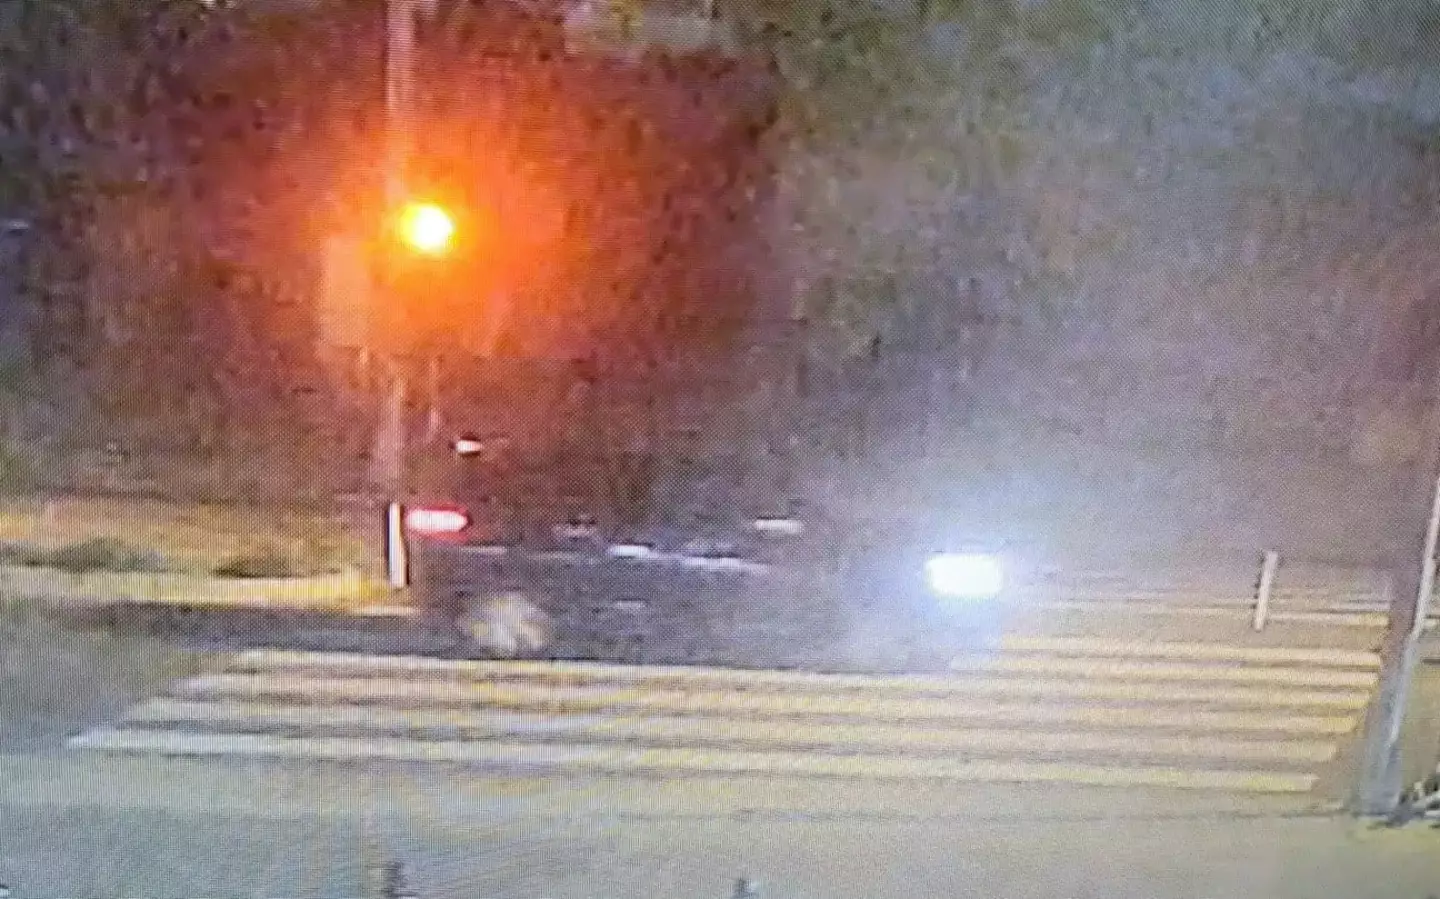 Police located the vehicle they believe was involved in the abduction.